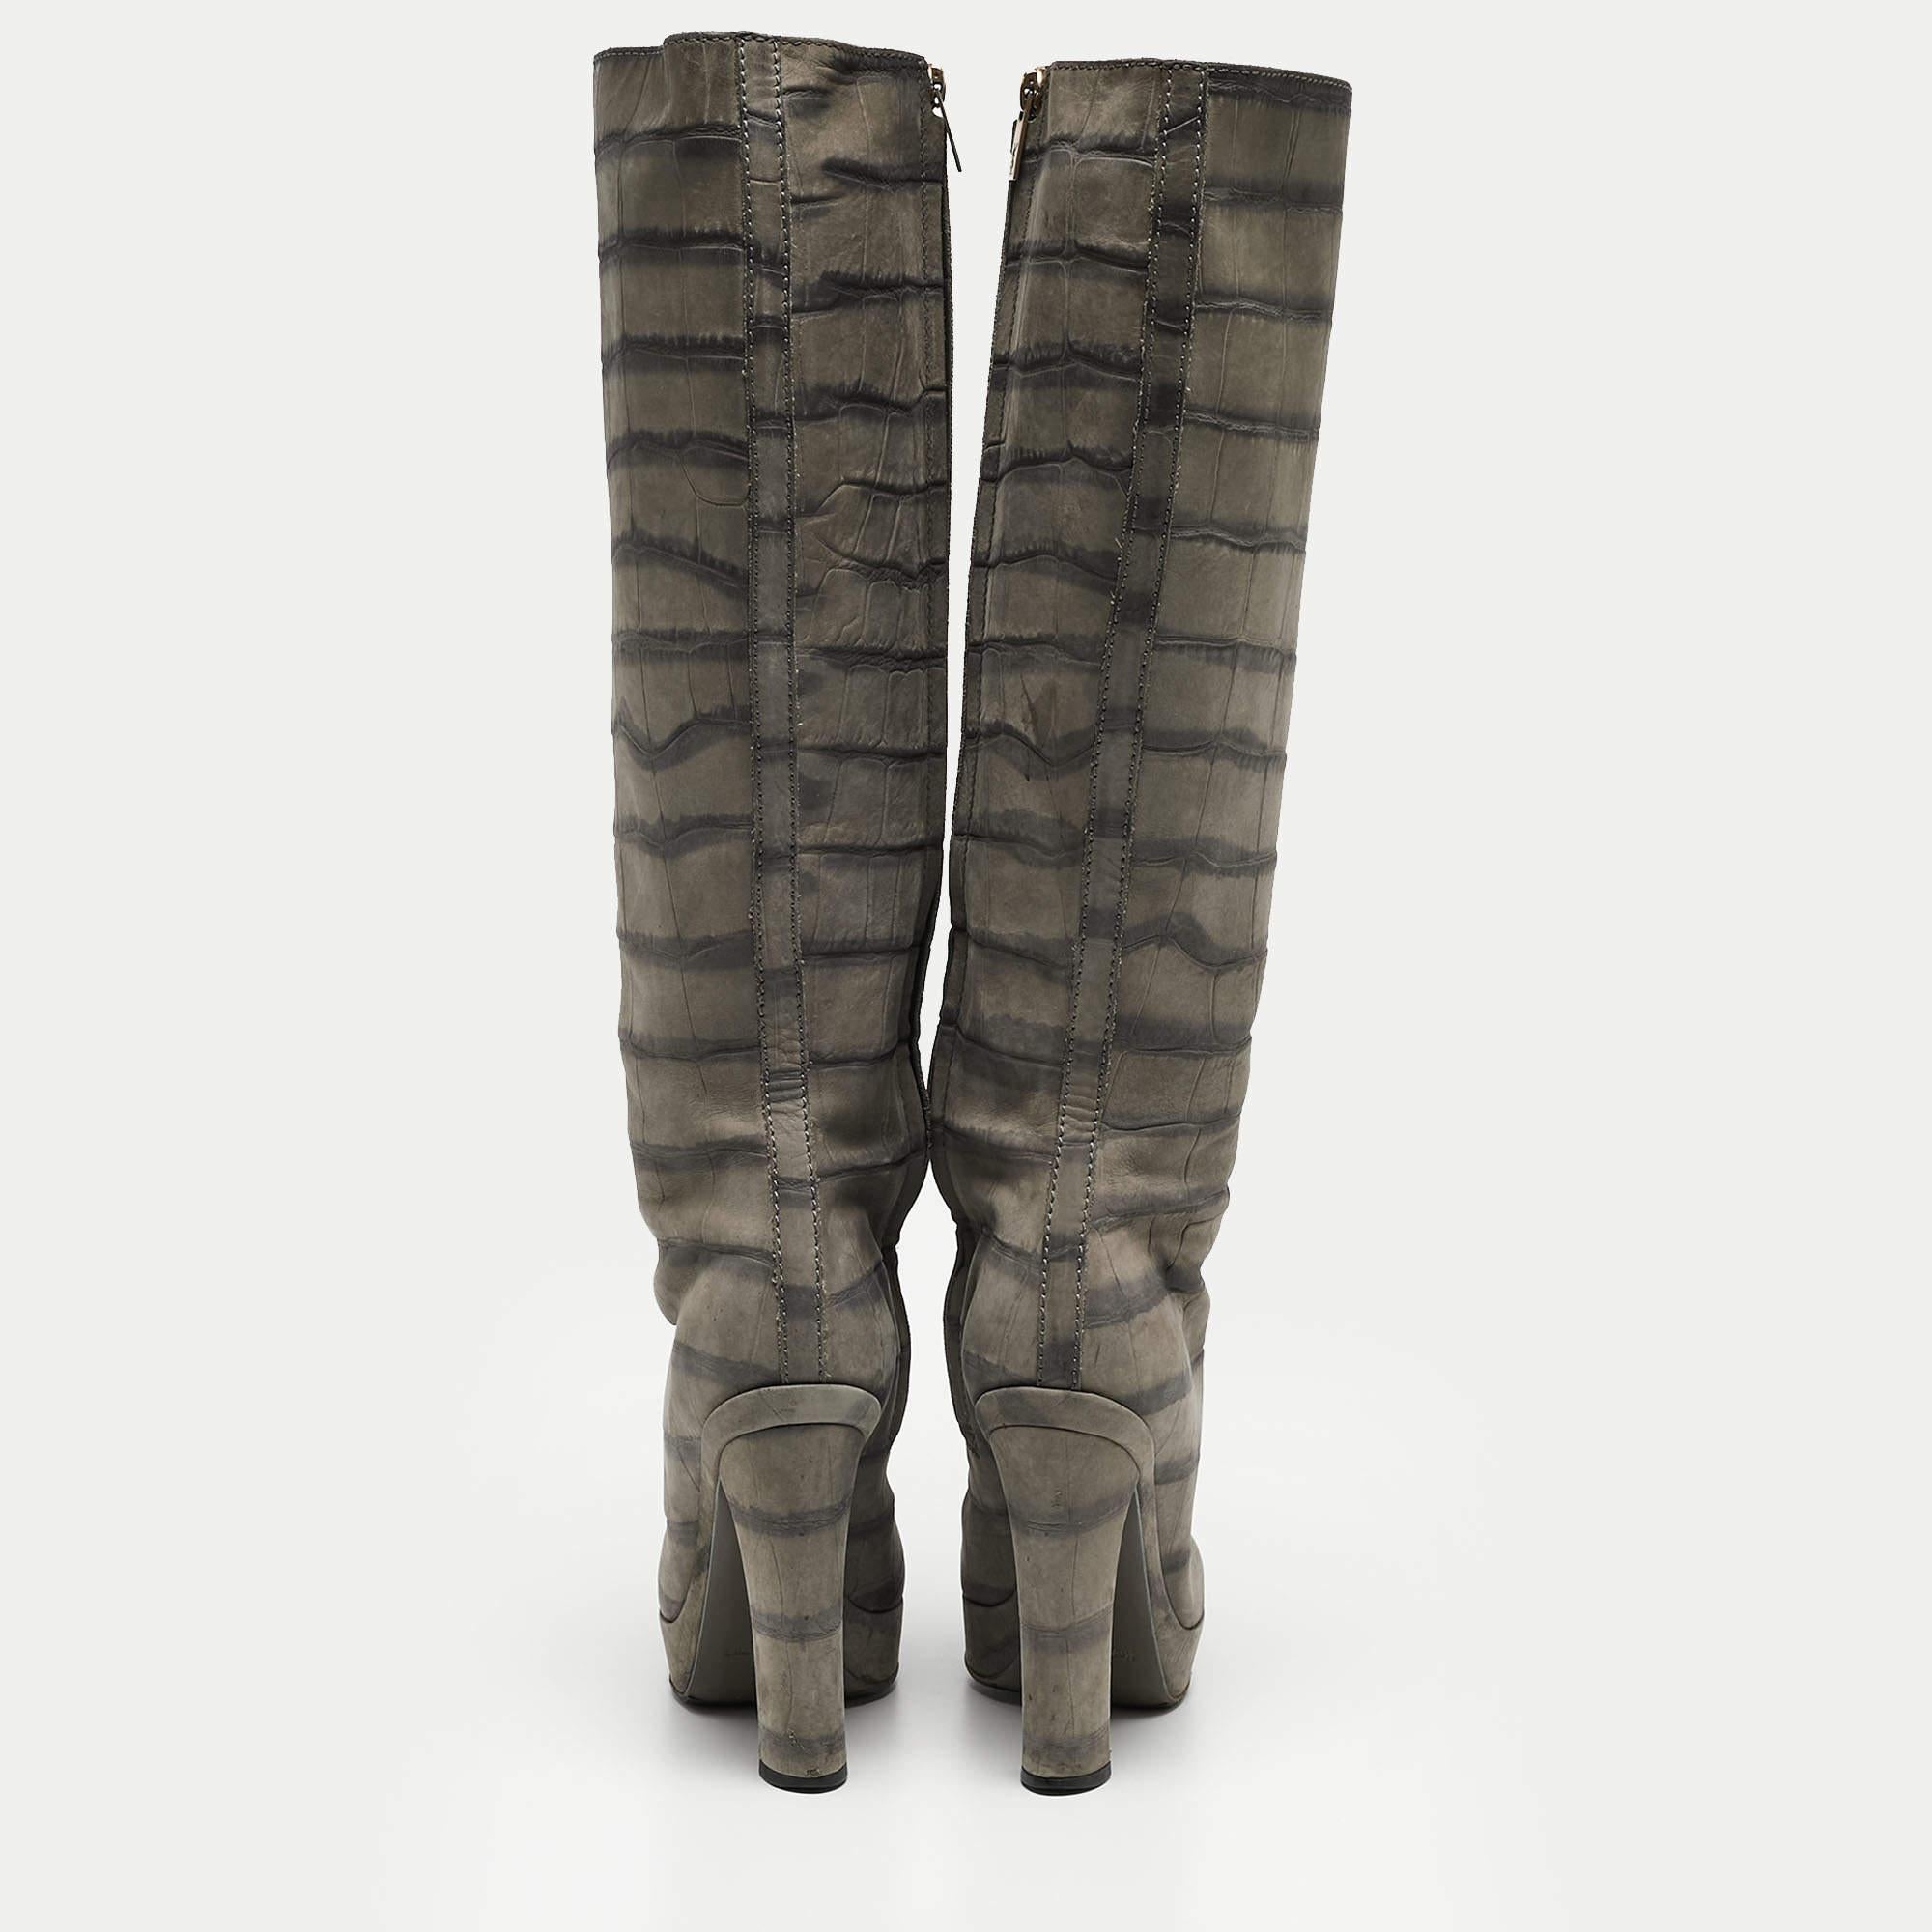 You are sure to make heads turn every time you wear these chic knee-length boots from Louis Vuitton! The grey boots have been crafted from croc-embossed leather. This is one pair you definitely need to get your hands on!

Includes: Original Dustbag